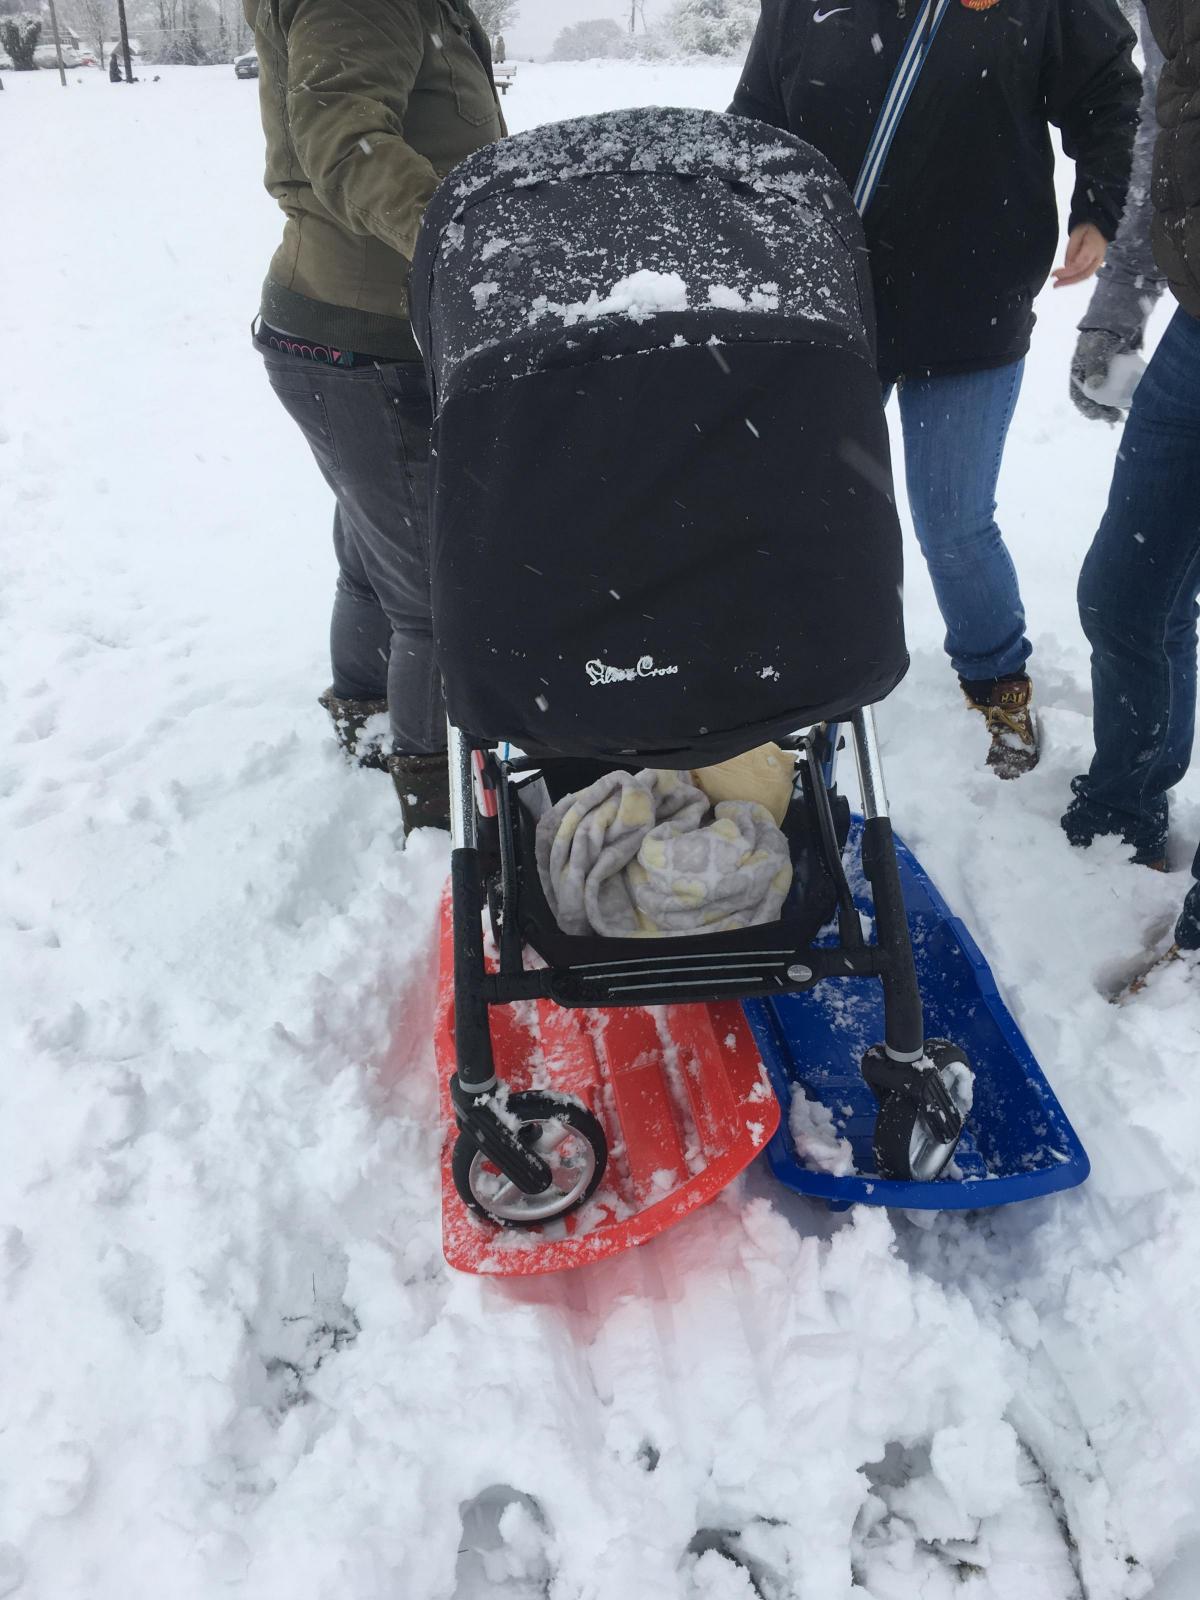 Kate Tully: "This was the only way we could get out and about to enjoy the snow in Lane End today with a pushchair!"